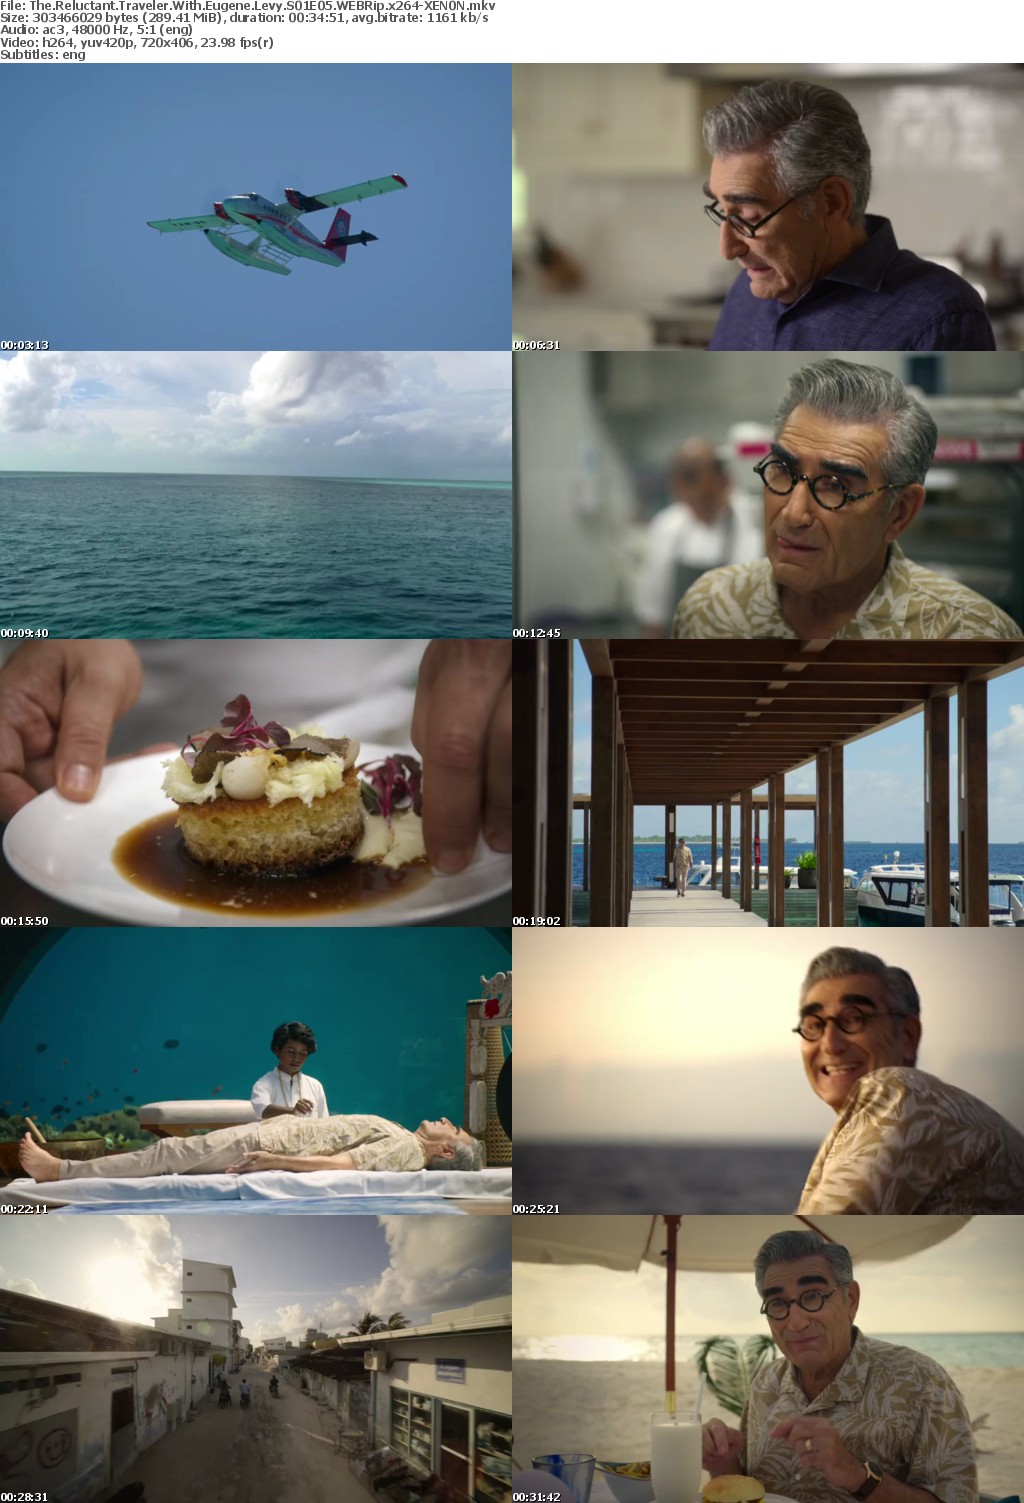 The Reluctant Traveler With Eugene Levy S01E05 WEBRip x264-XEN0N